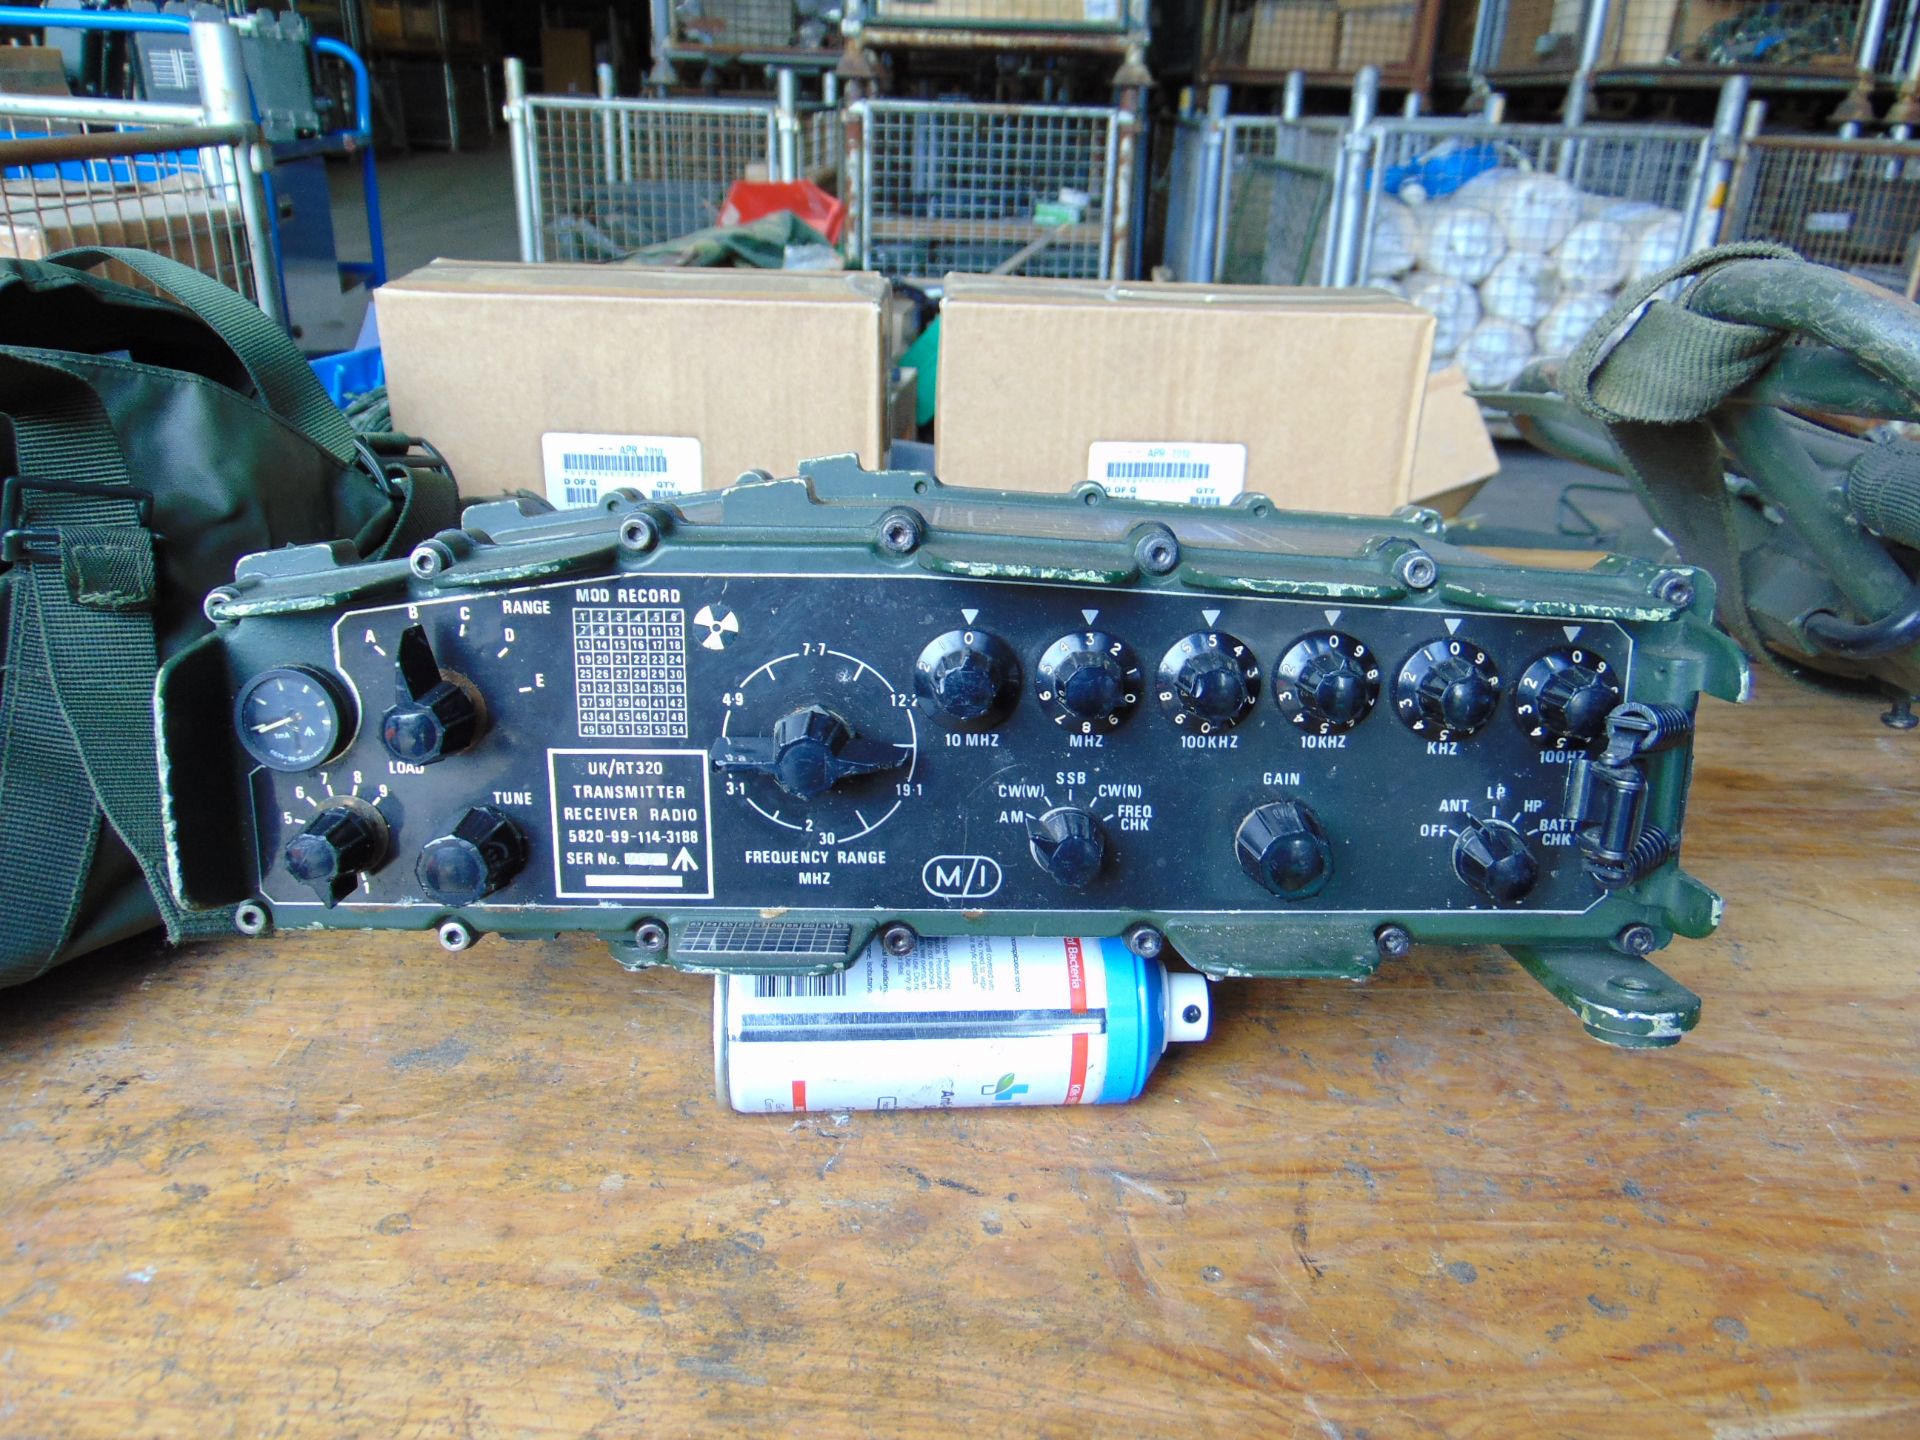 Clansman UK/RT 320 Transmitter Receiver HF c/w Kit & Two Spare Batteries as shown - Image 5 of 6